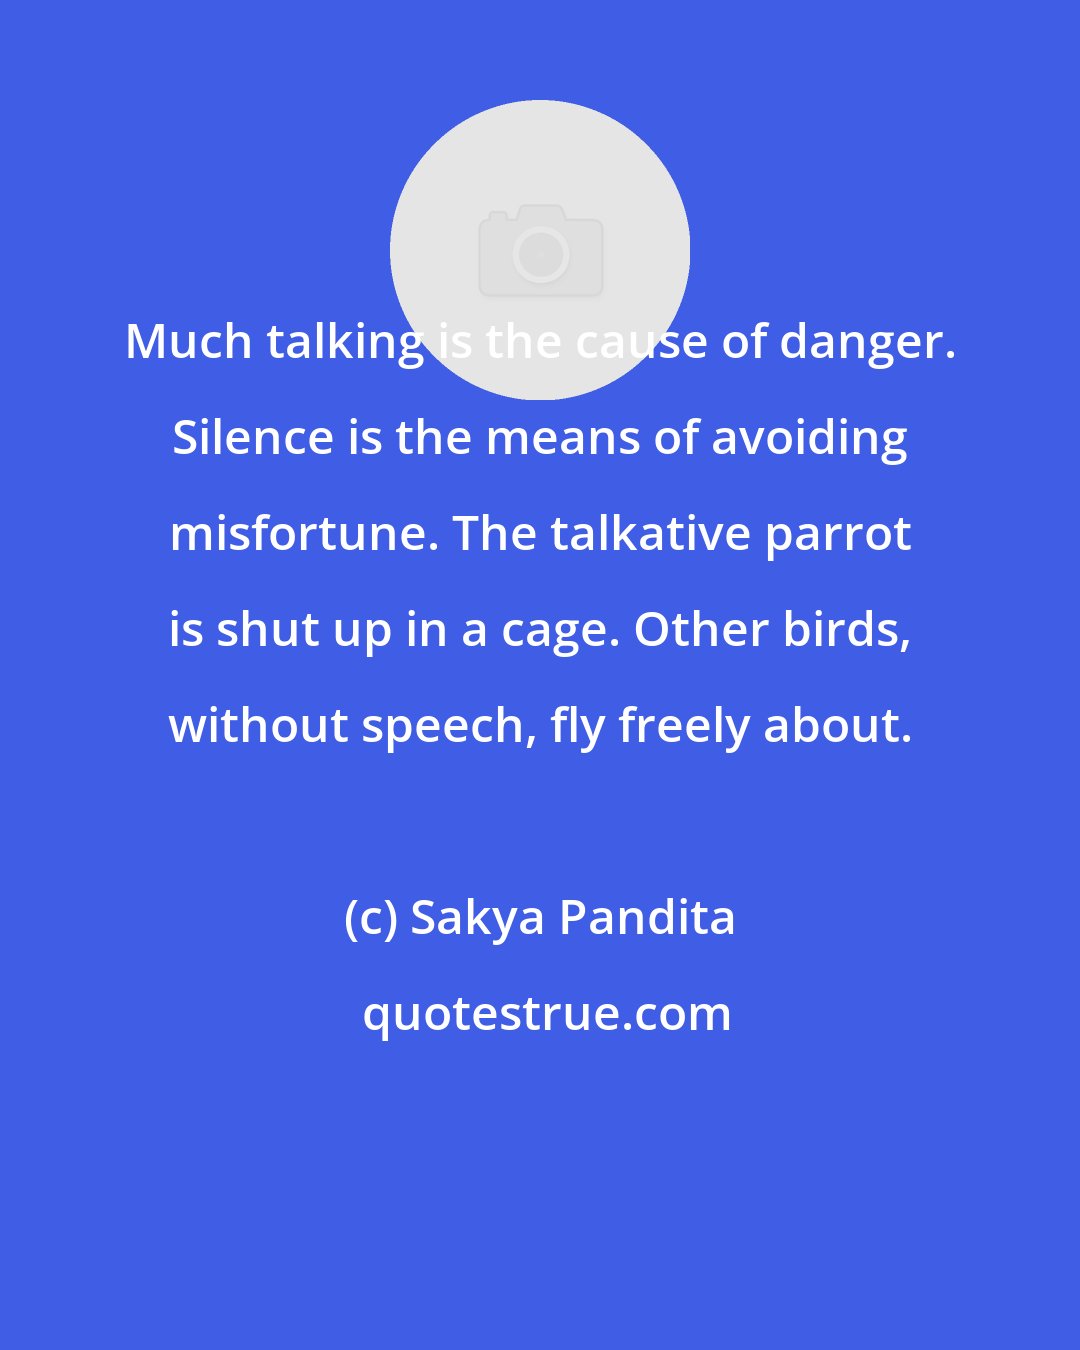 Sakya Pandita: Much talking is the cause of danger. Silence is the means of avoiding misfortune. The talkative parrot is shut up in a cage. Other birds, without speech, fly freely about.